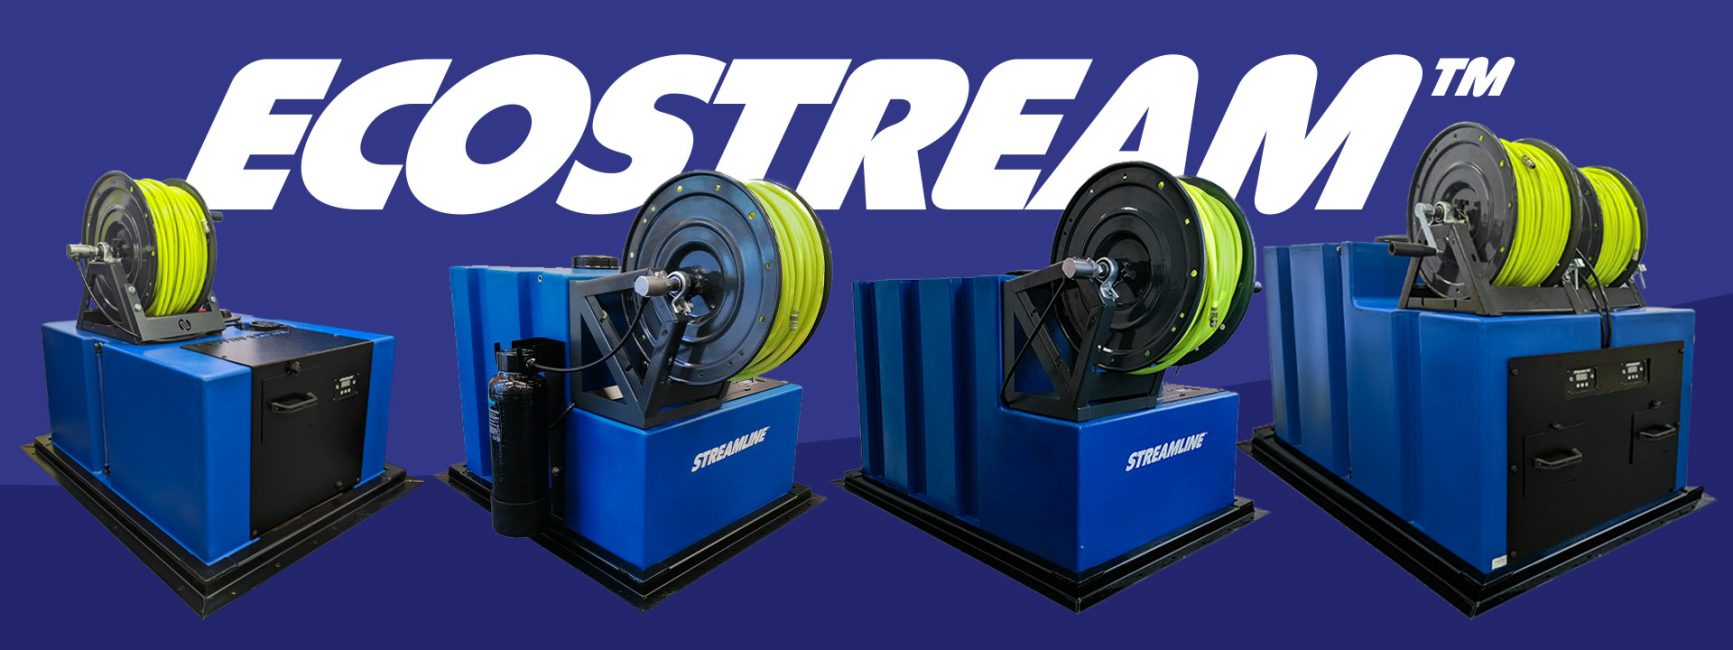 Streamline® Launch The New Ecostream™ 255 Ltr Window Cleaning Tank.